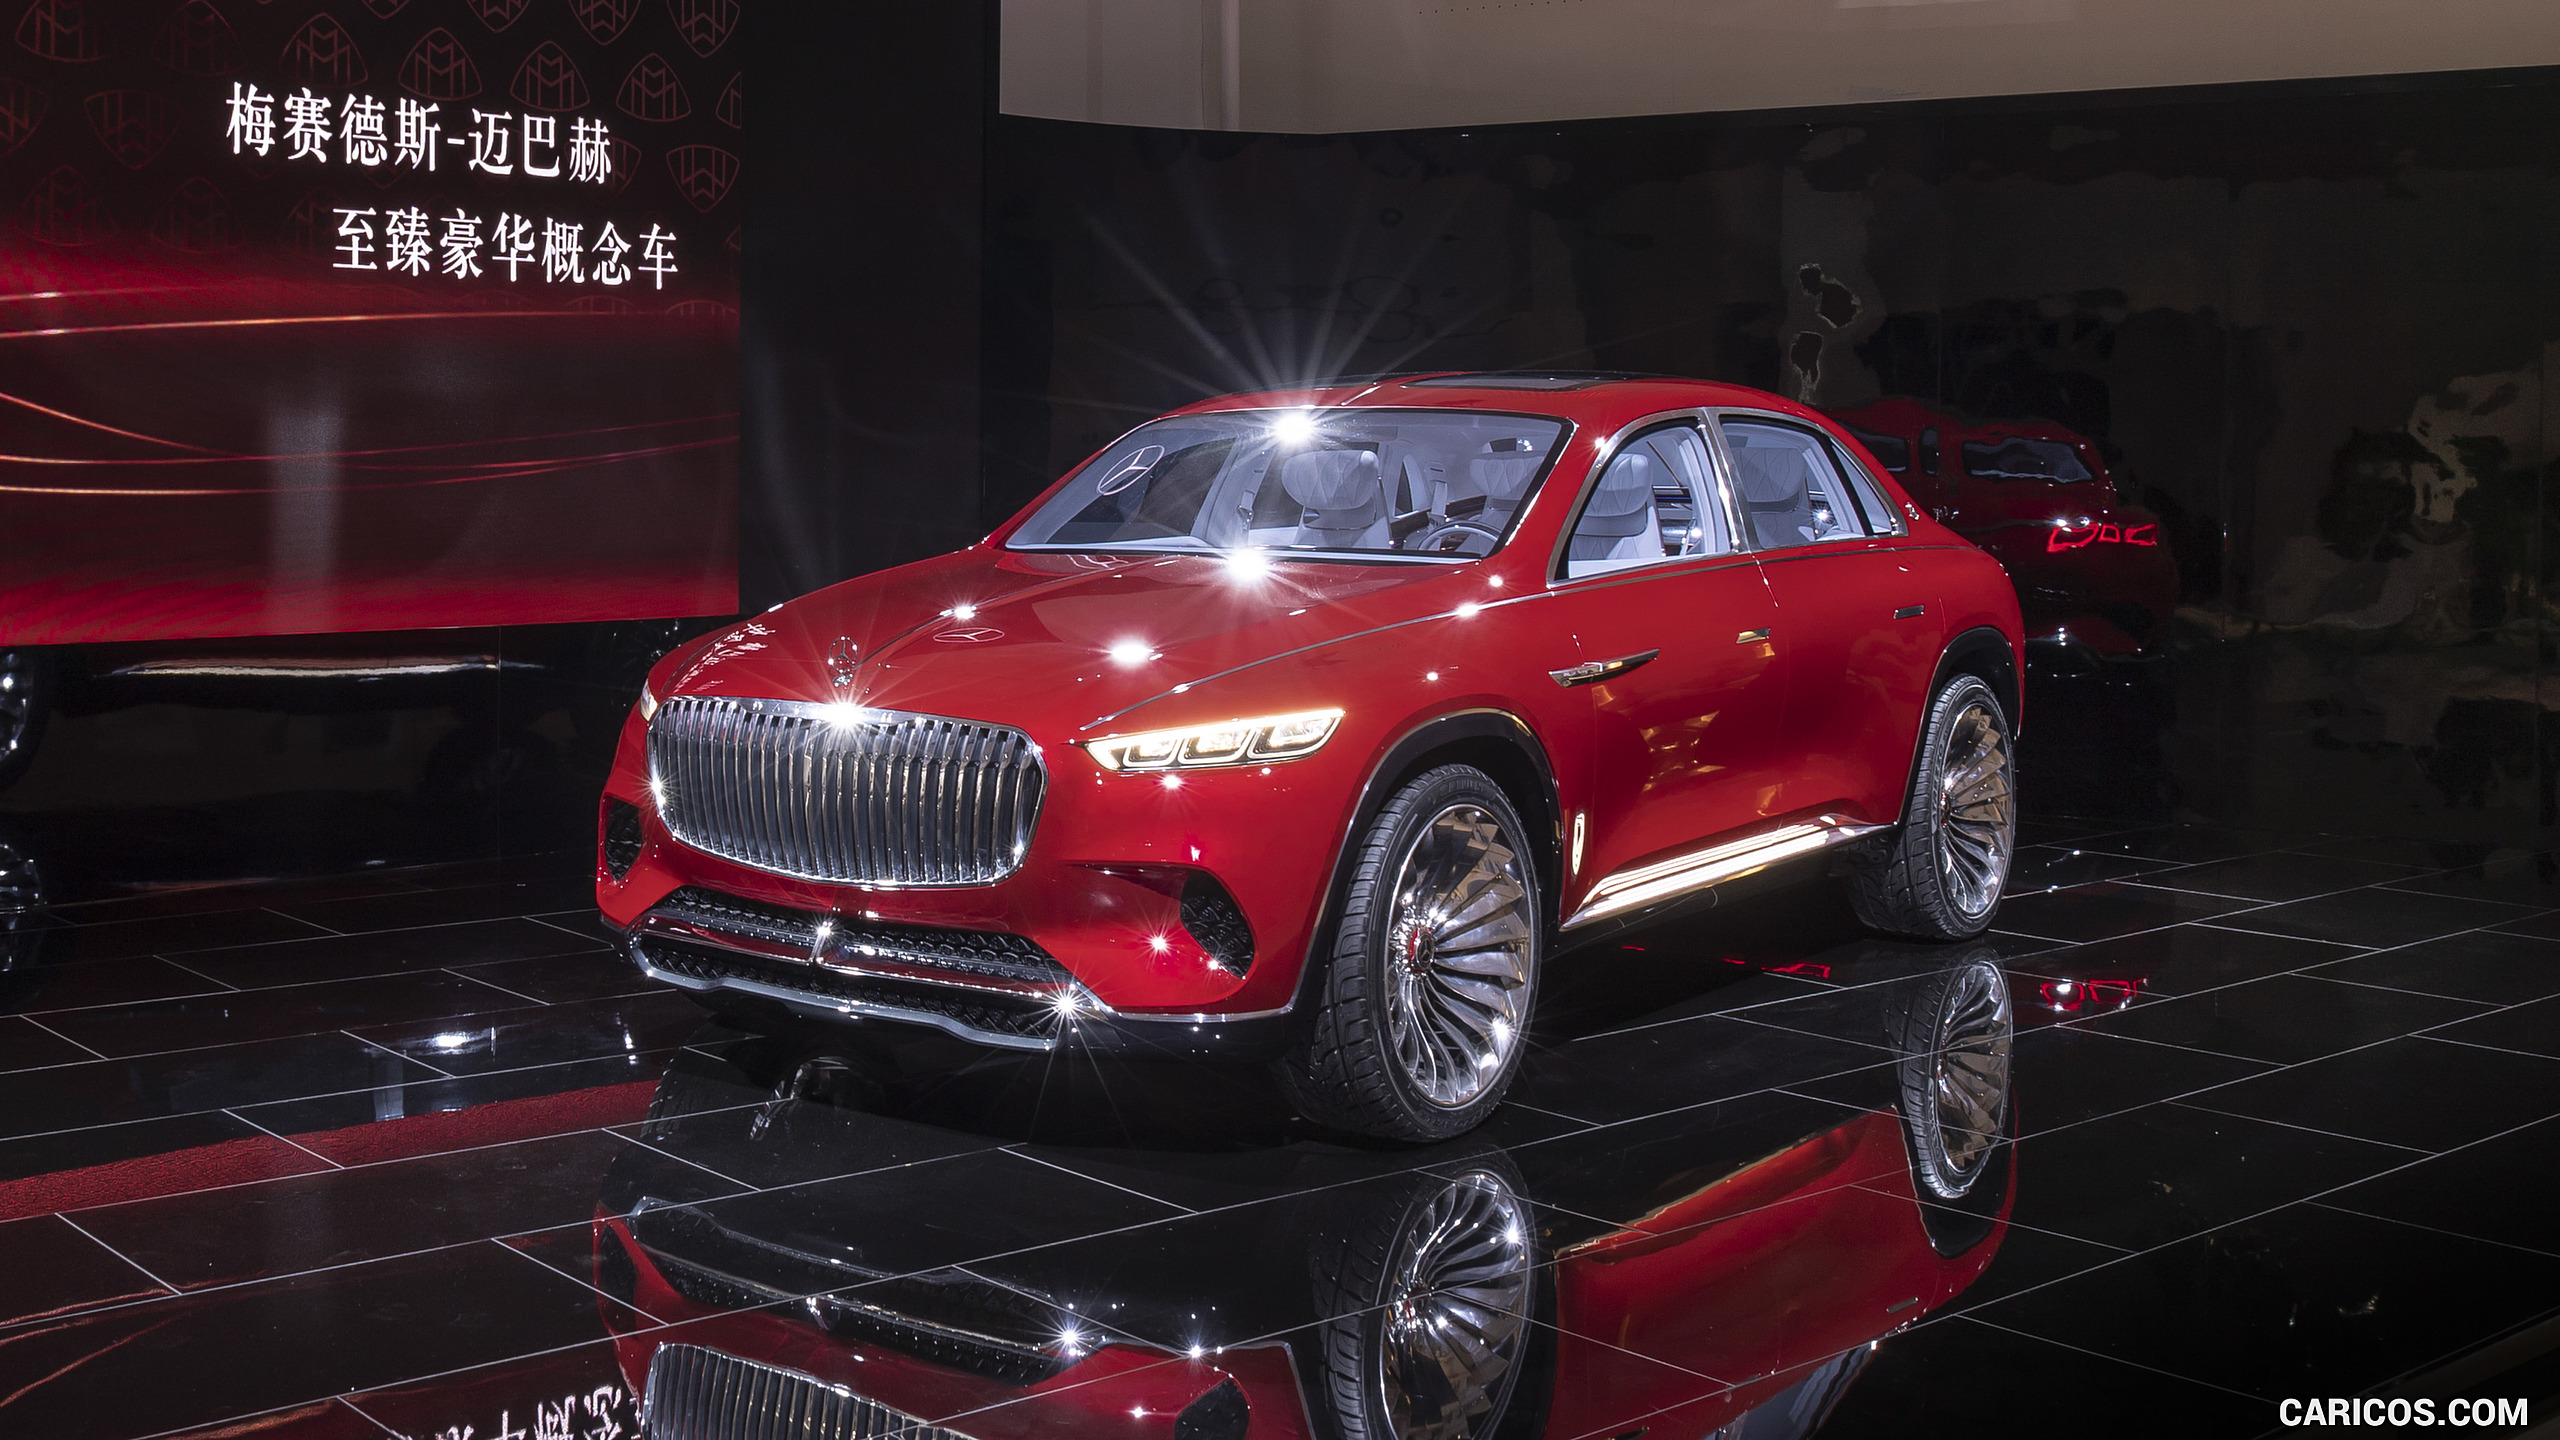 2018 Mercedes-Maybach Vision Ultimate Luxury SUV Concept - Front Three-Quarter, #6 of 41